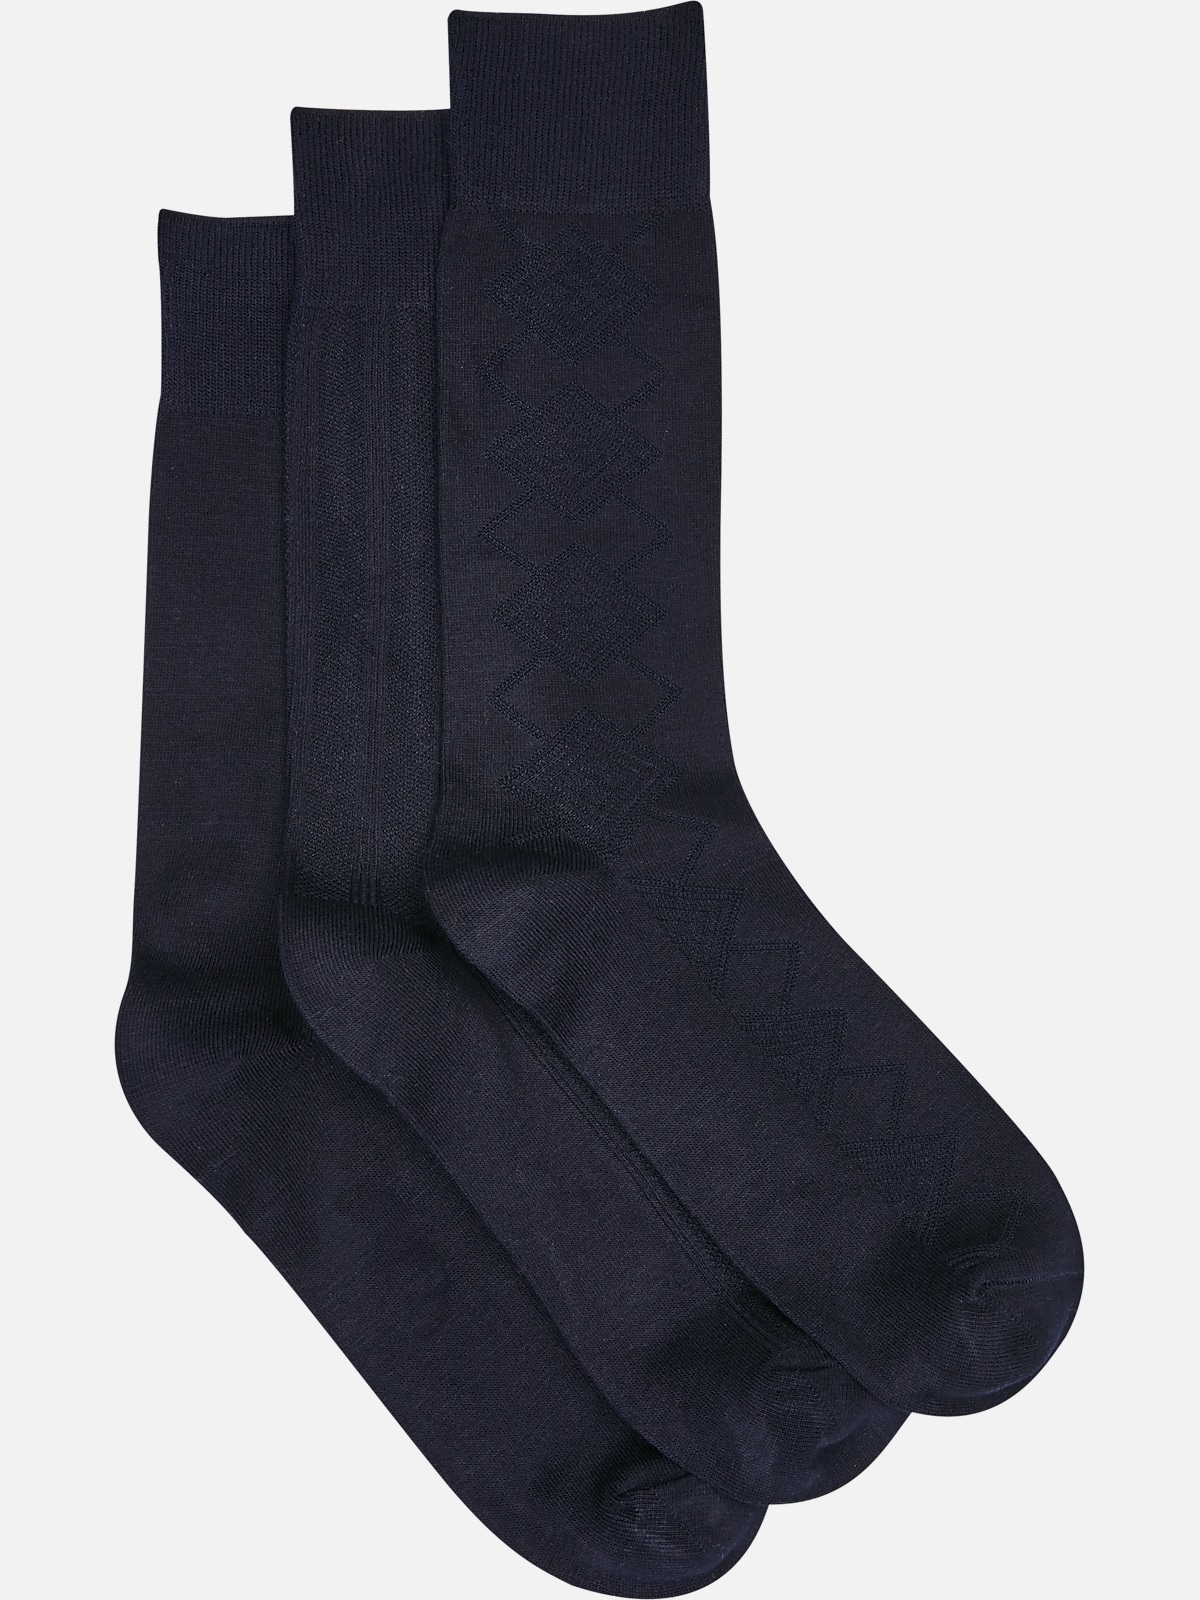 Pronto Uomo Bamboo Blend Socks 3-Pack | All Sale| Men's Wearhouse